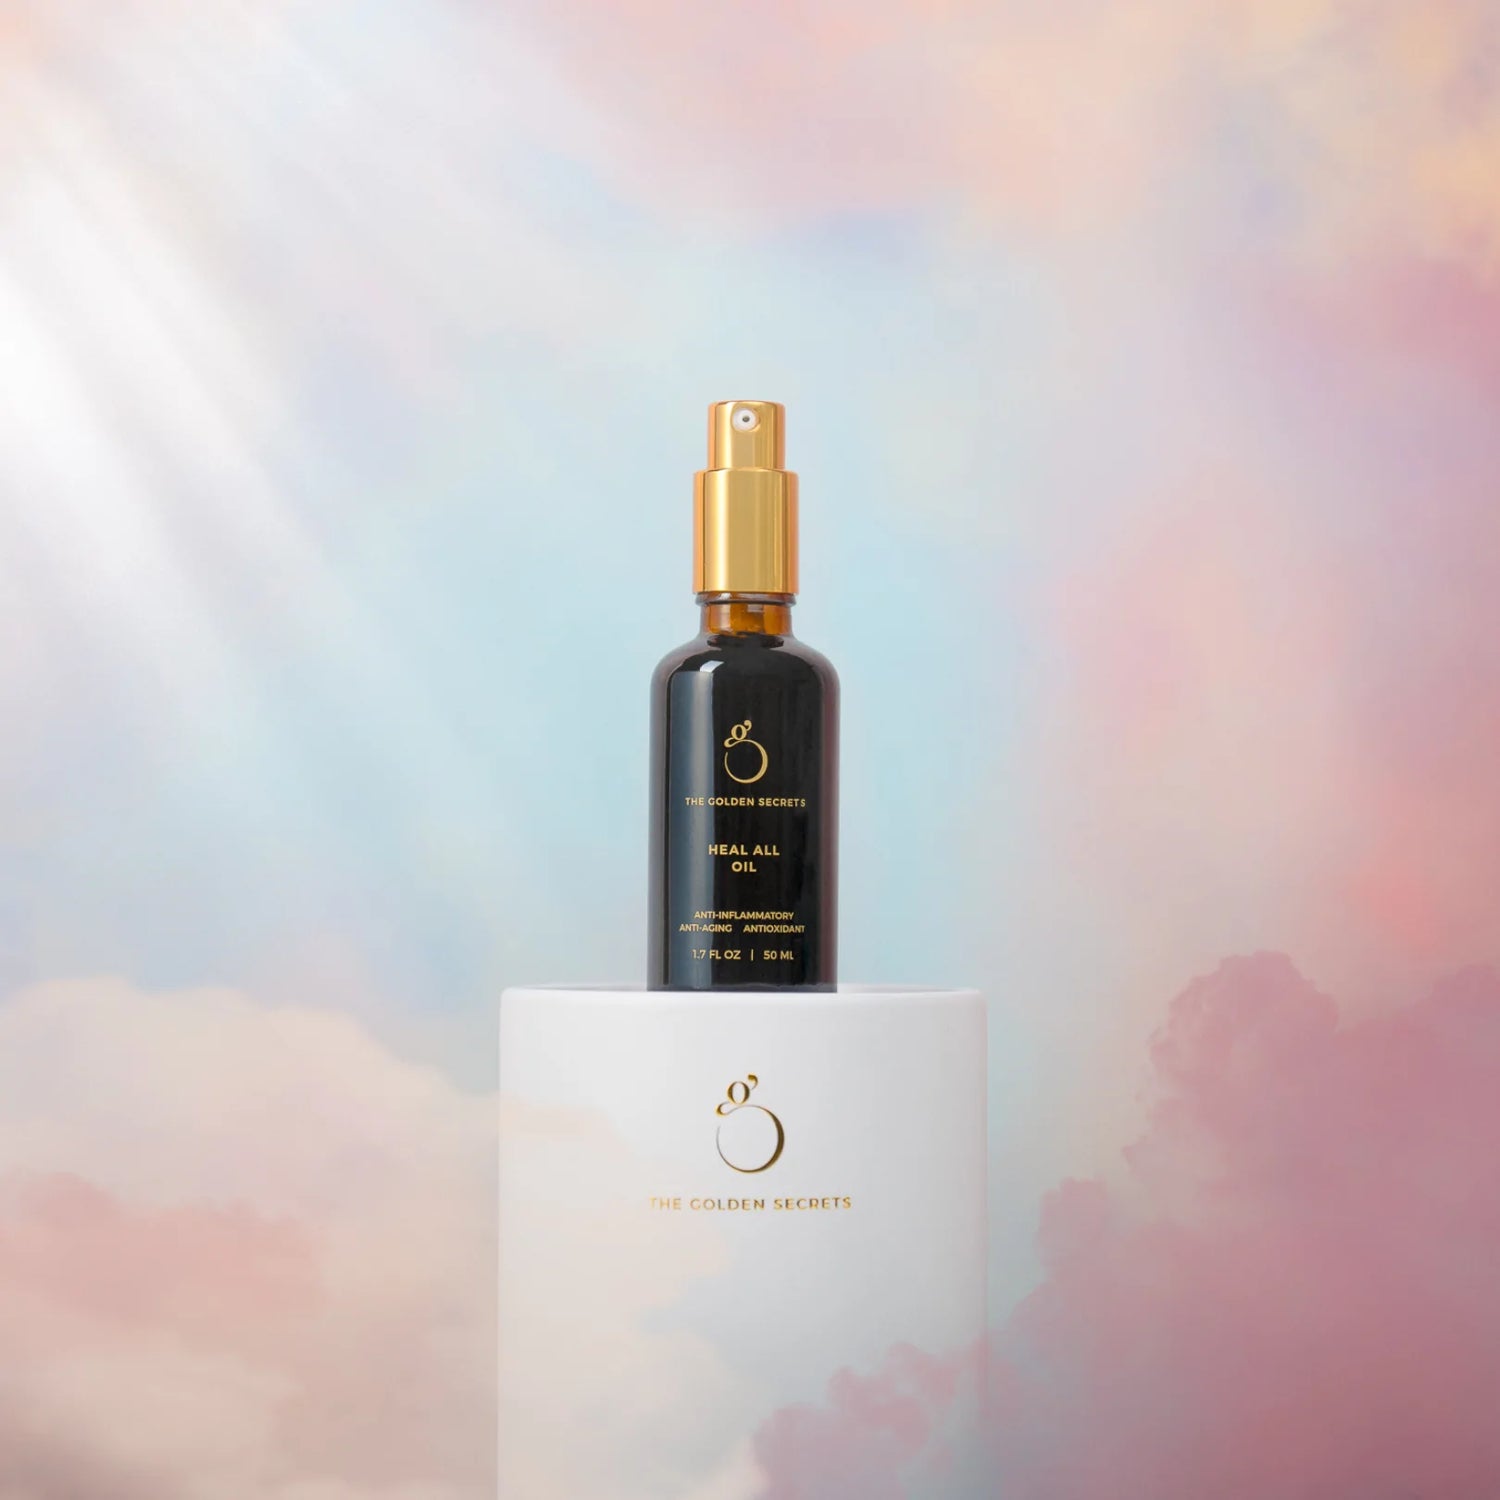 HEAL ALL OIL by: The Golden Secrets